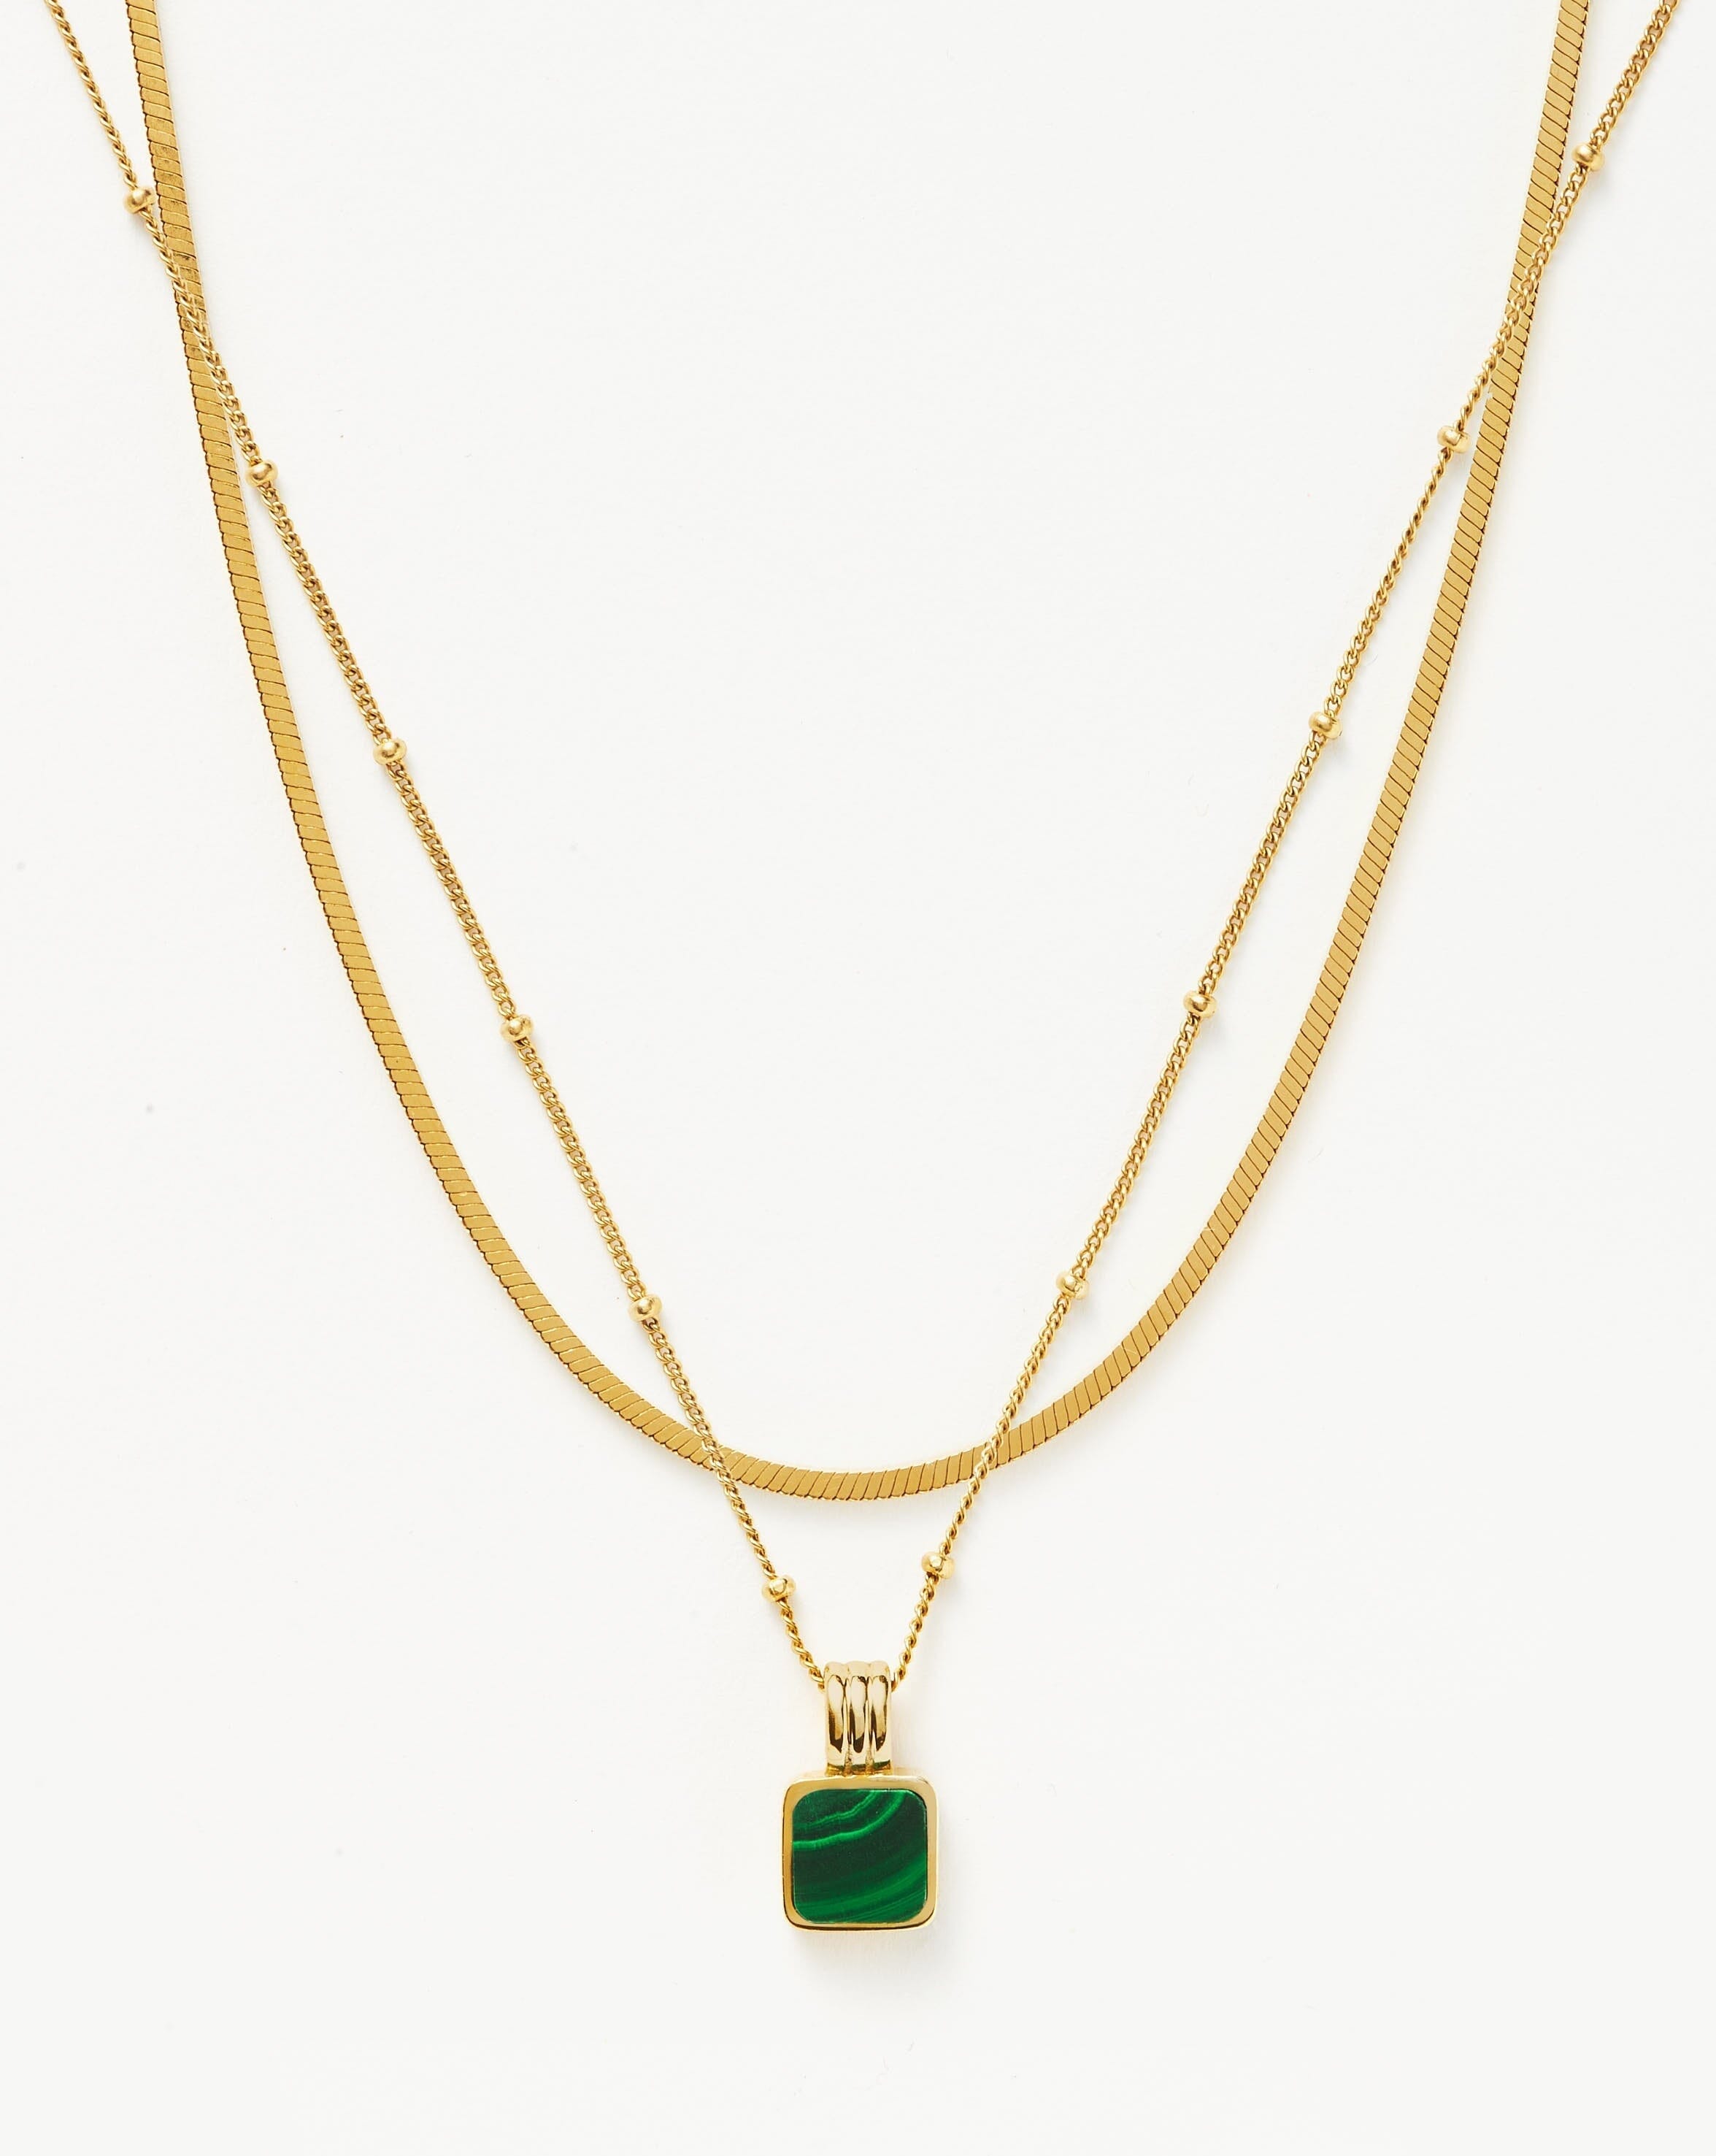 Iconic Lucy Williams Malachite Necklace Set | 18ct Gold Plated Vermeil ...